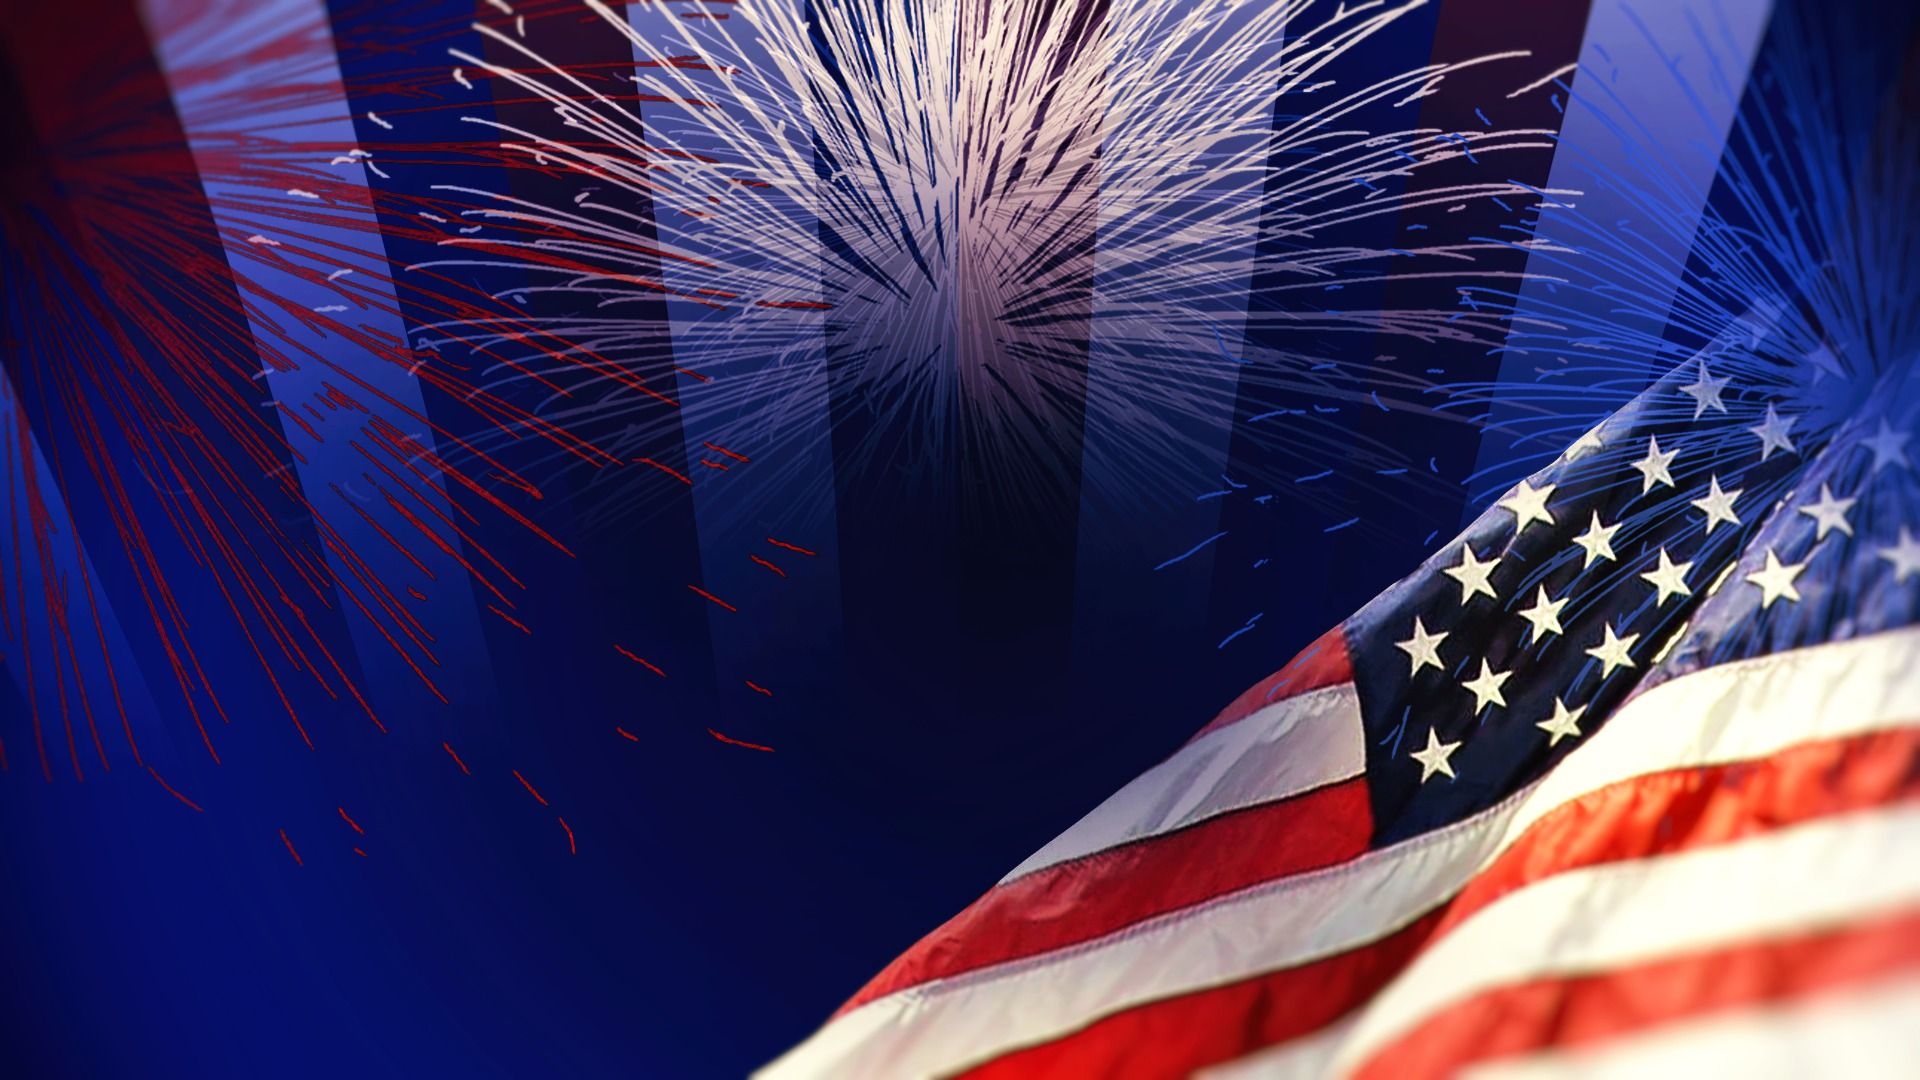 Local fireworks, parades for the 4th of July